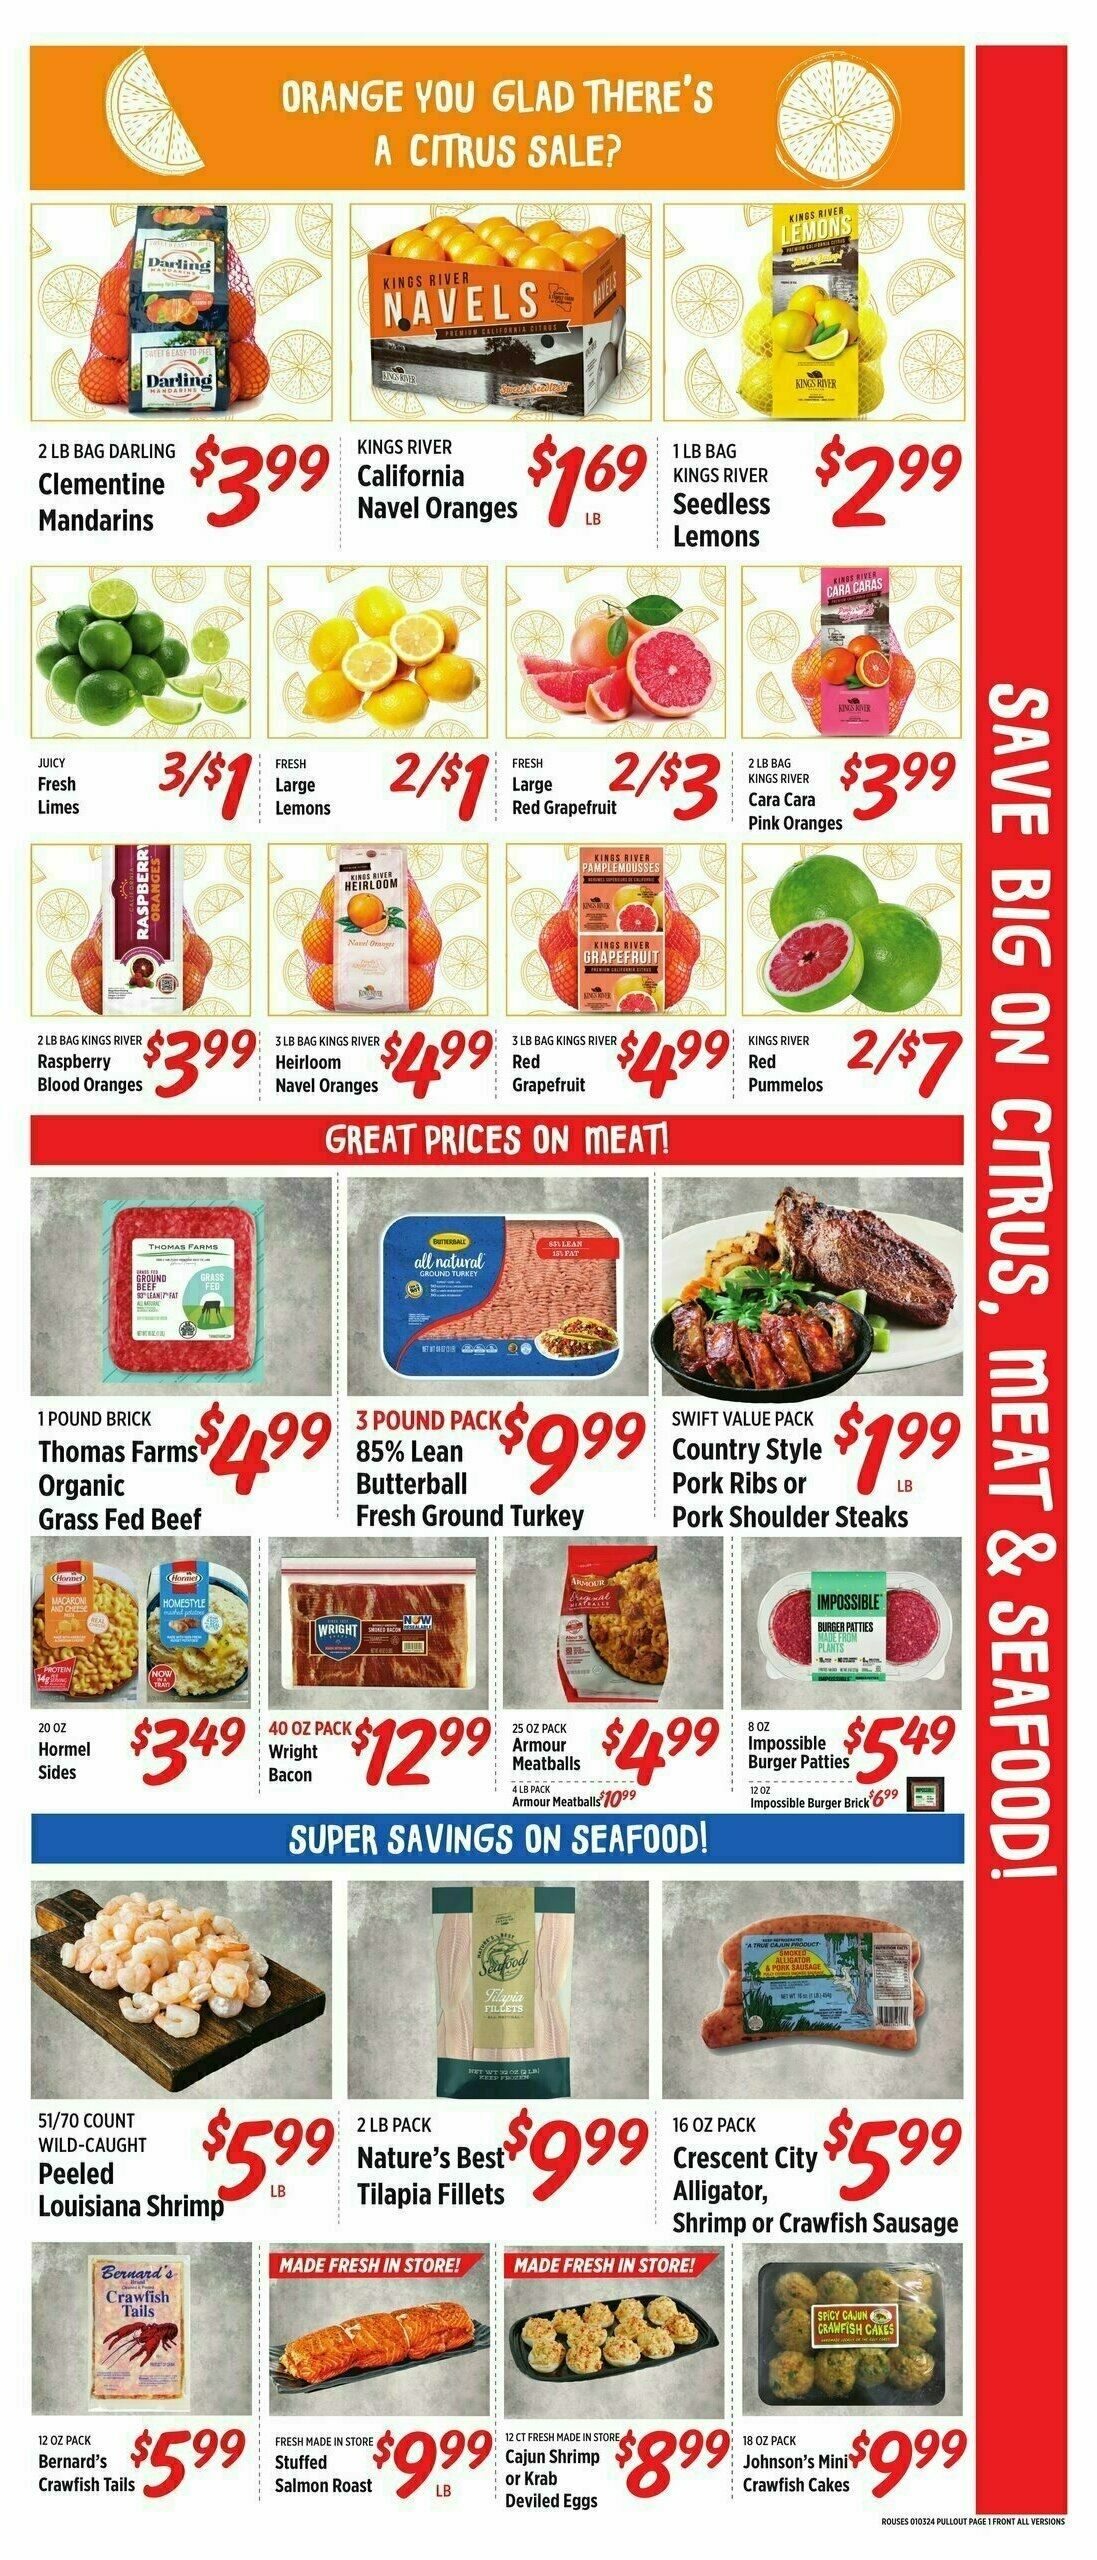 Rouses Markets Weekly Ad from January 4